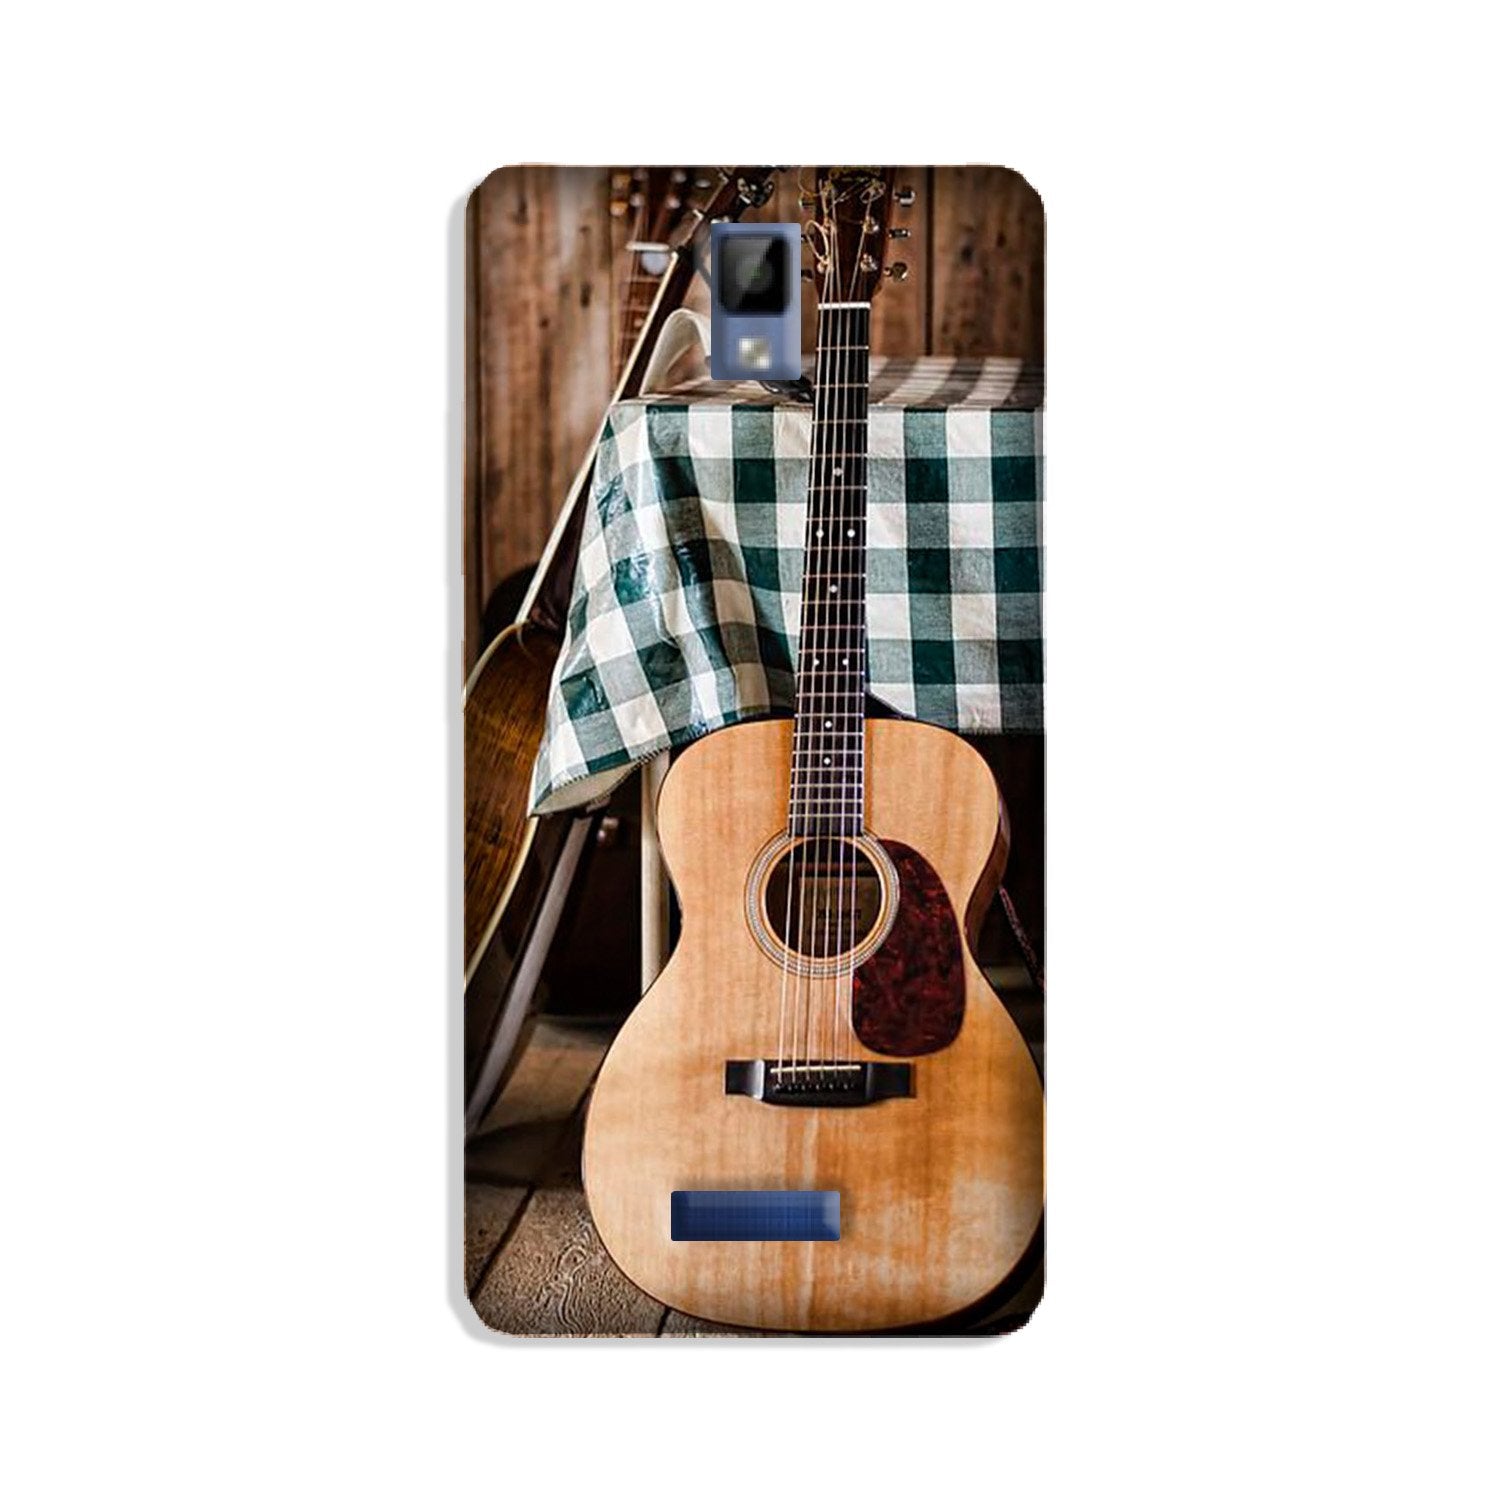 Guitar2 Case for Gionee P7